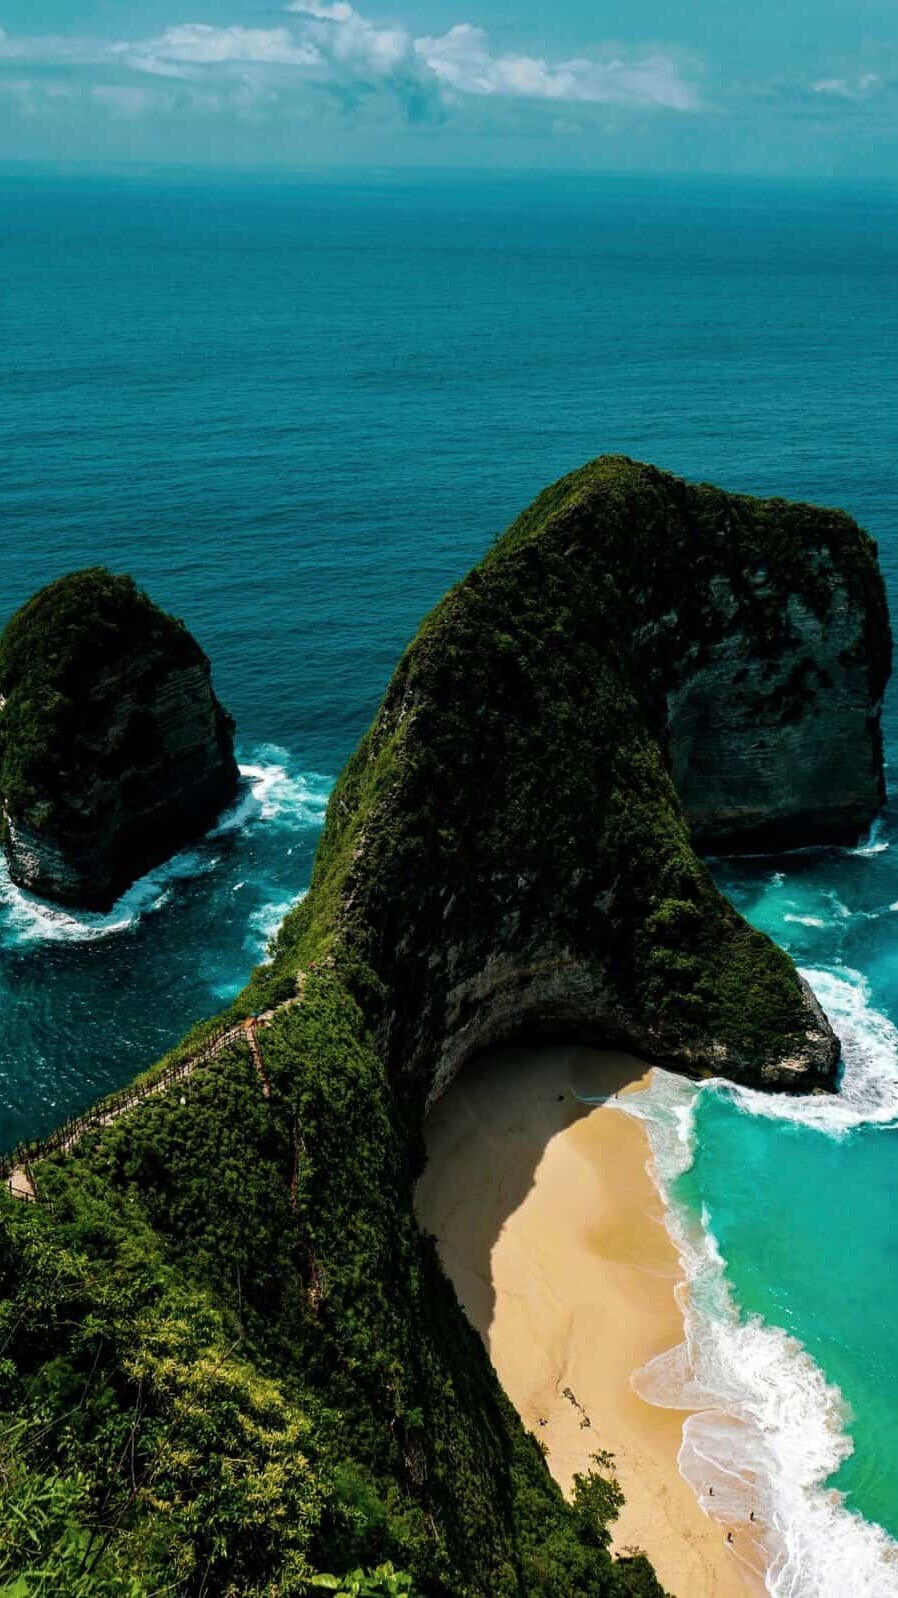 A stunning shot of a cliff and beach in Bali!